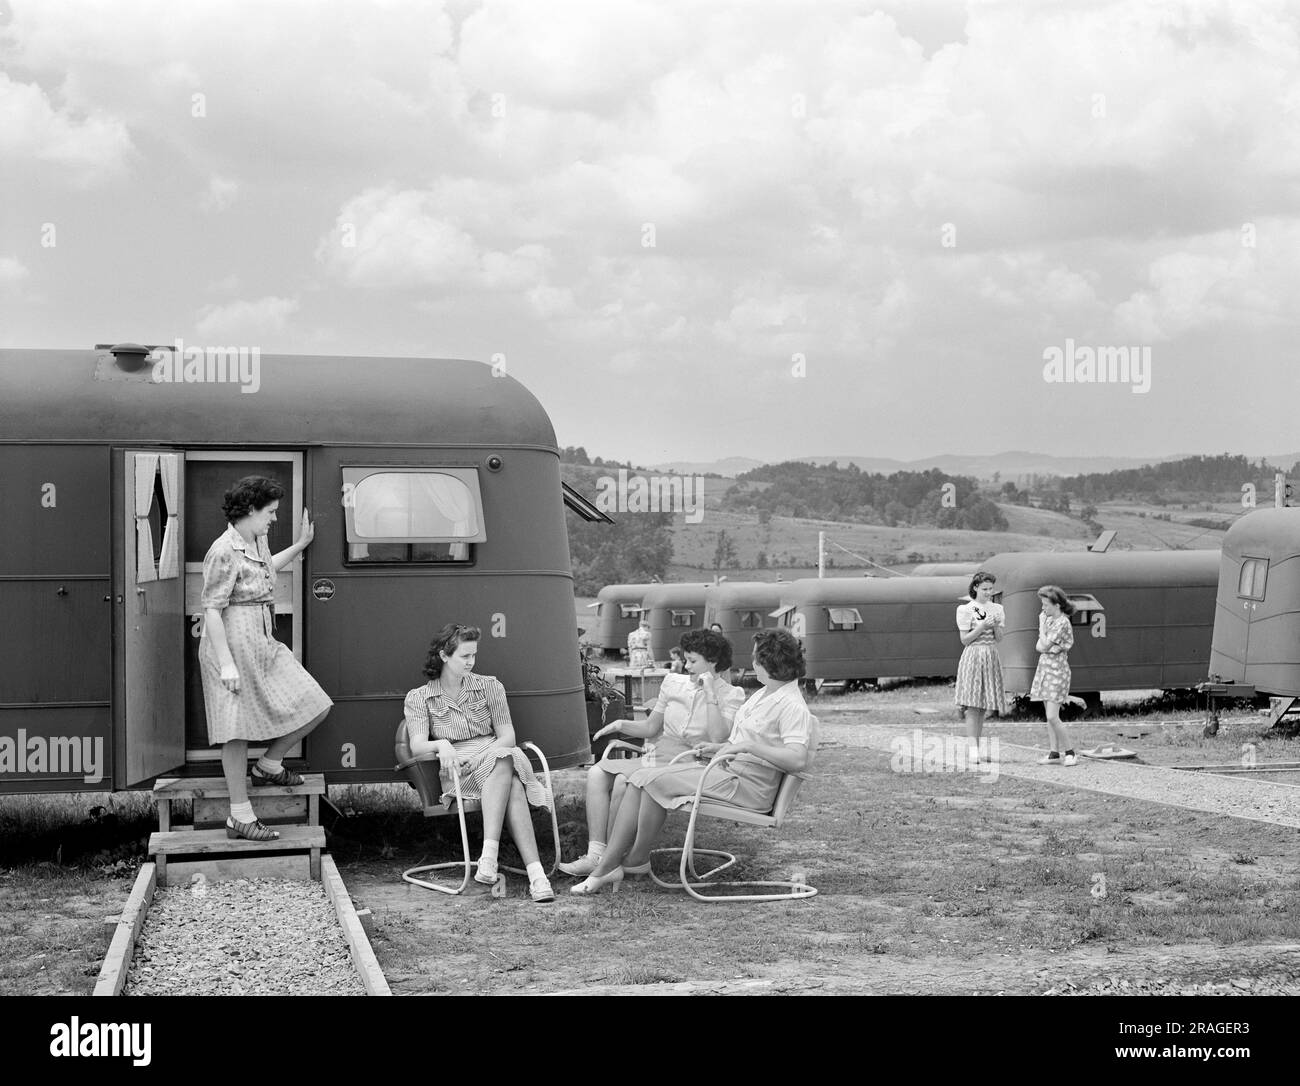 Group of women socializing near trailers used for housing of workers for Tennessee Valley Authority's (TVA) Douglas Dam project, Sevier County, Tennessee, USA, Arthur Rothstein, U.S. Farm Security Administration, June 1942 Stock Photo